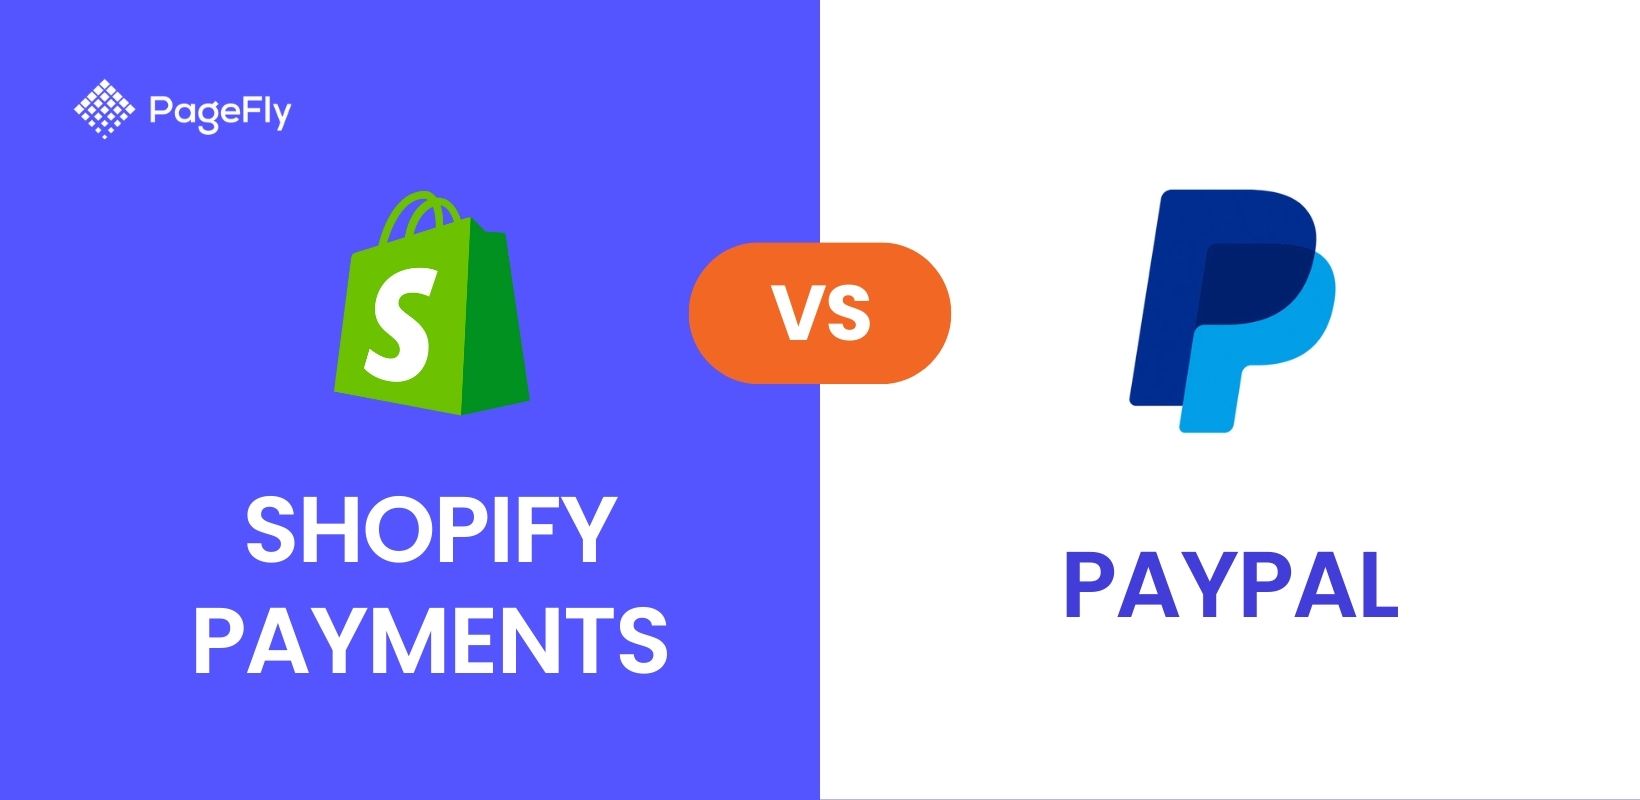 Shopify Payments vs PayPal: Which Is Right for Your Business?